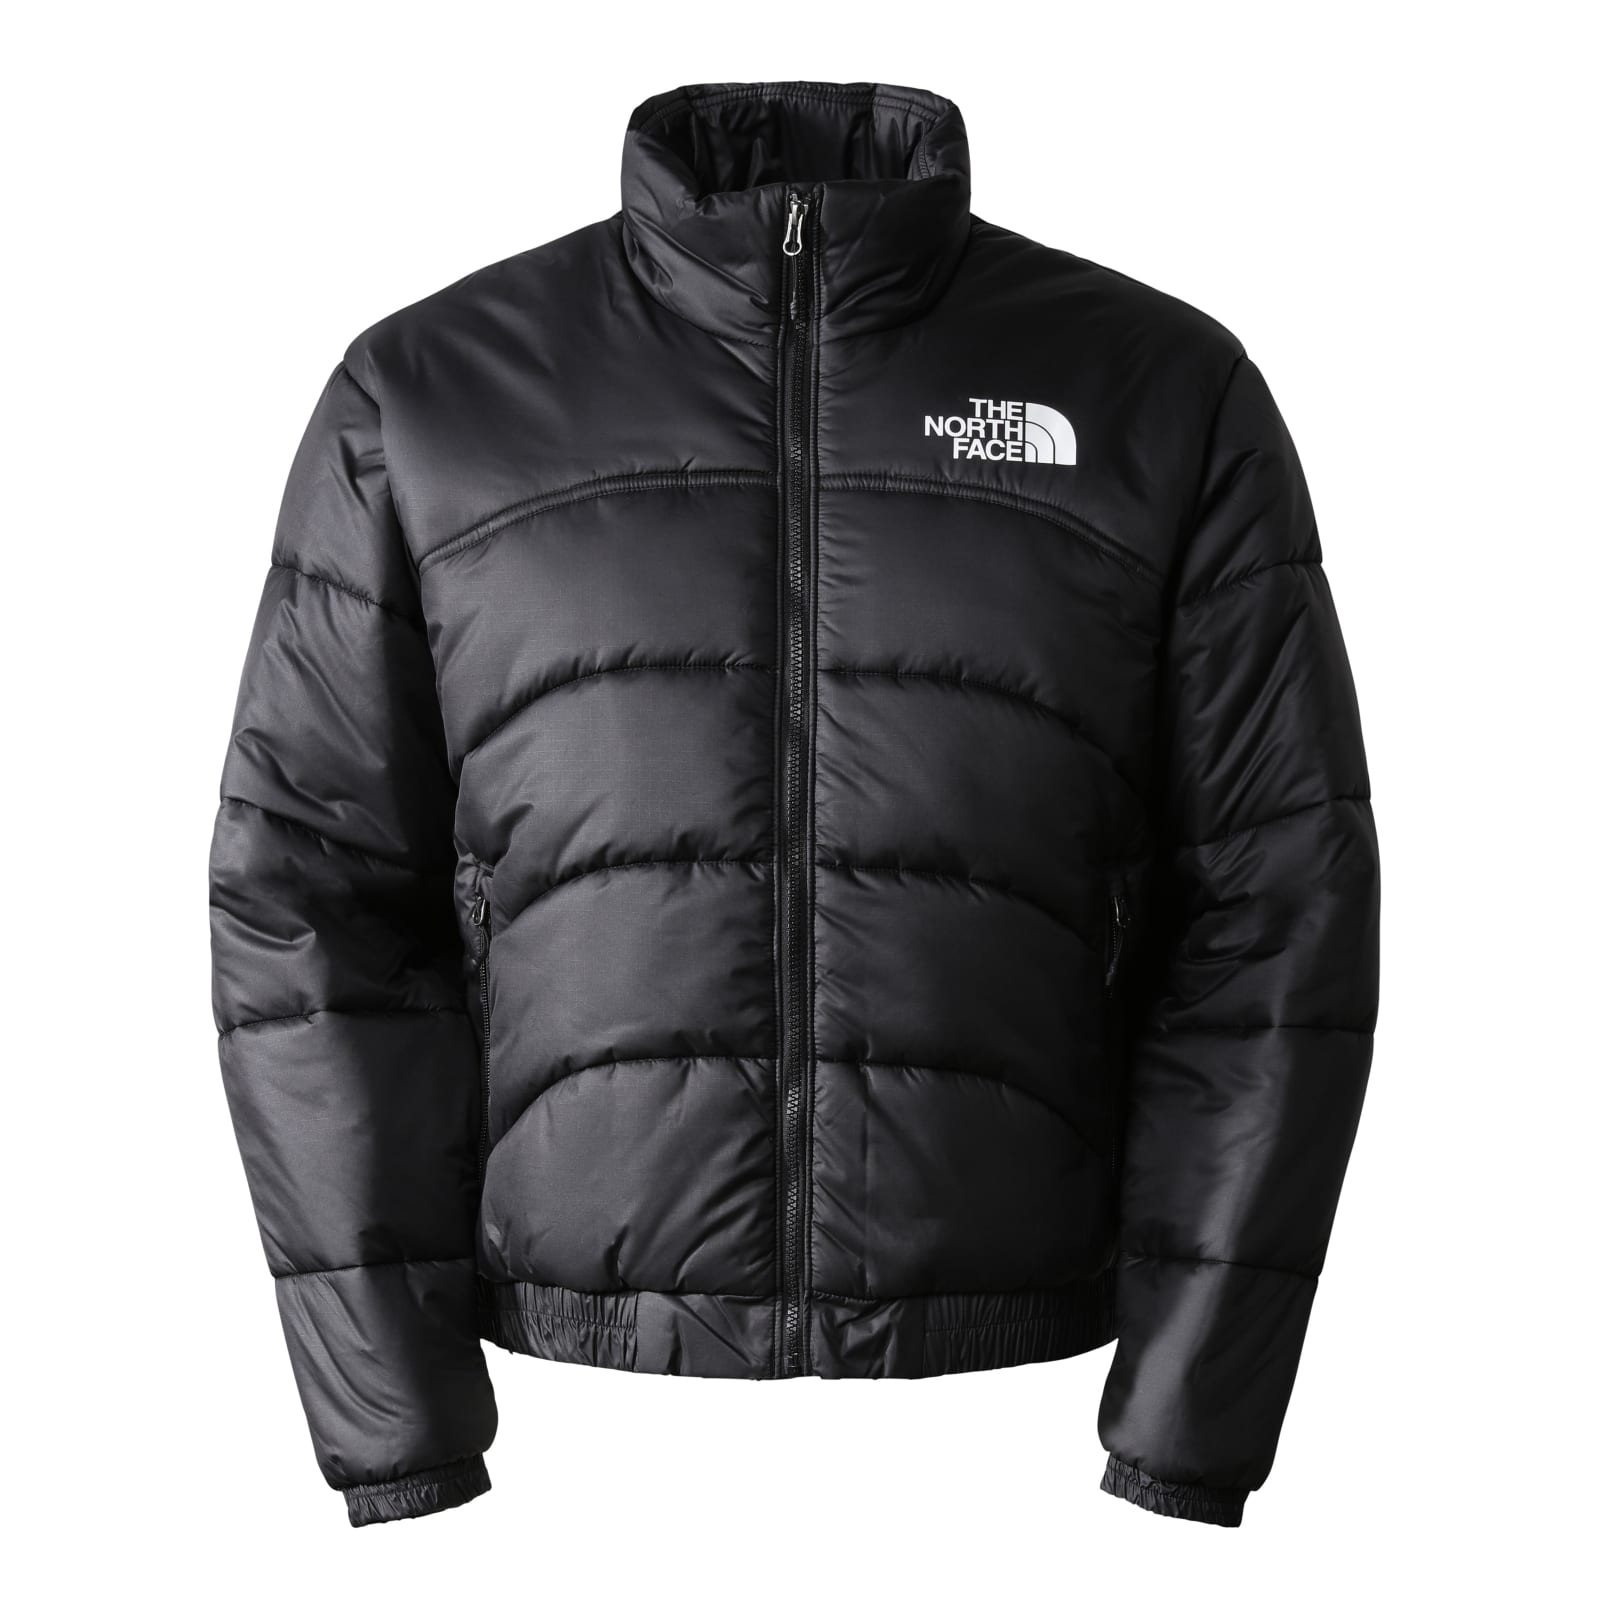 THE NORTH FACE M TNF JACKET 2000